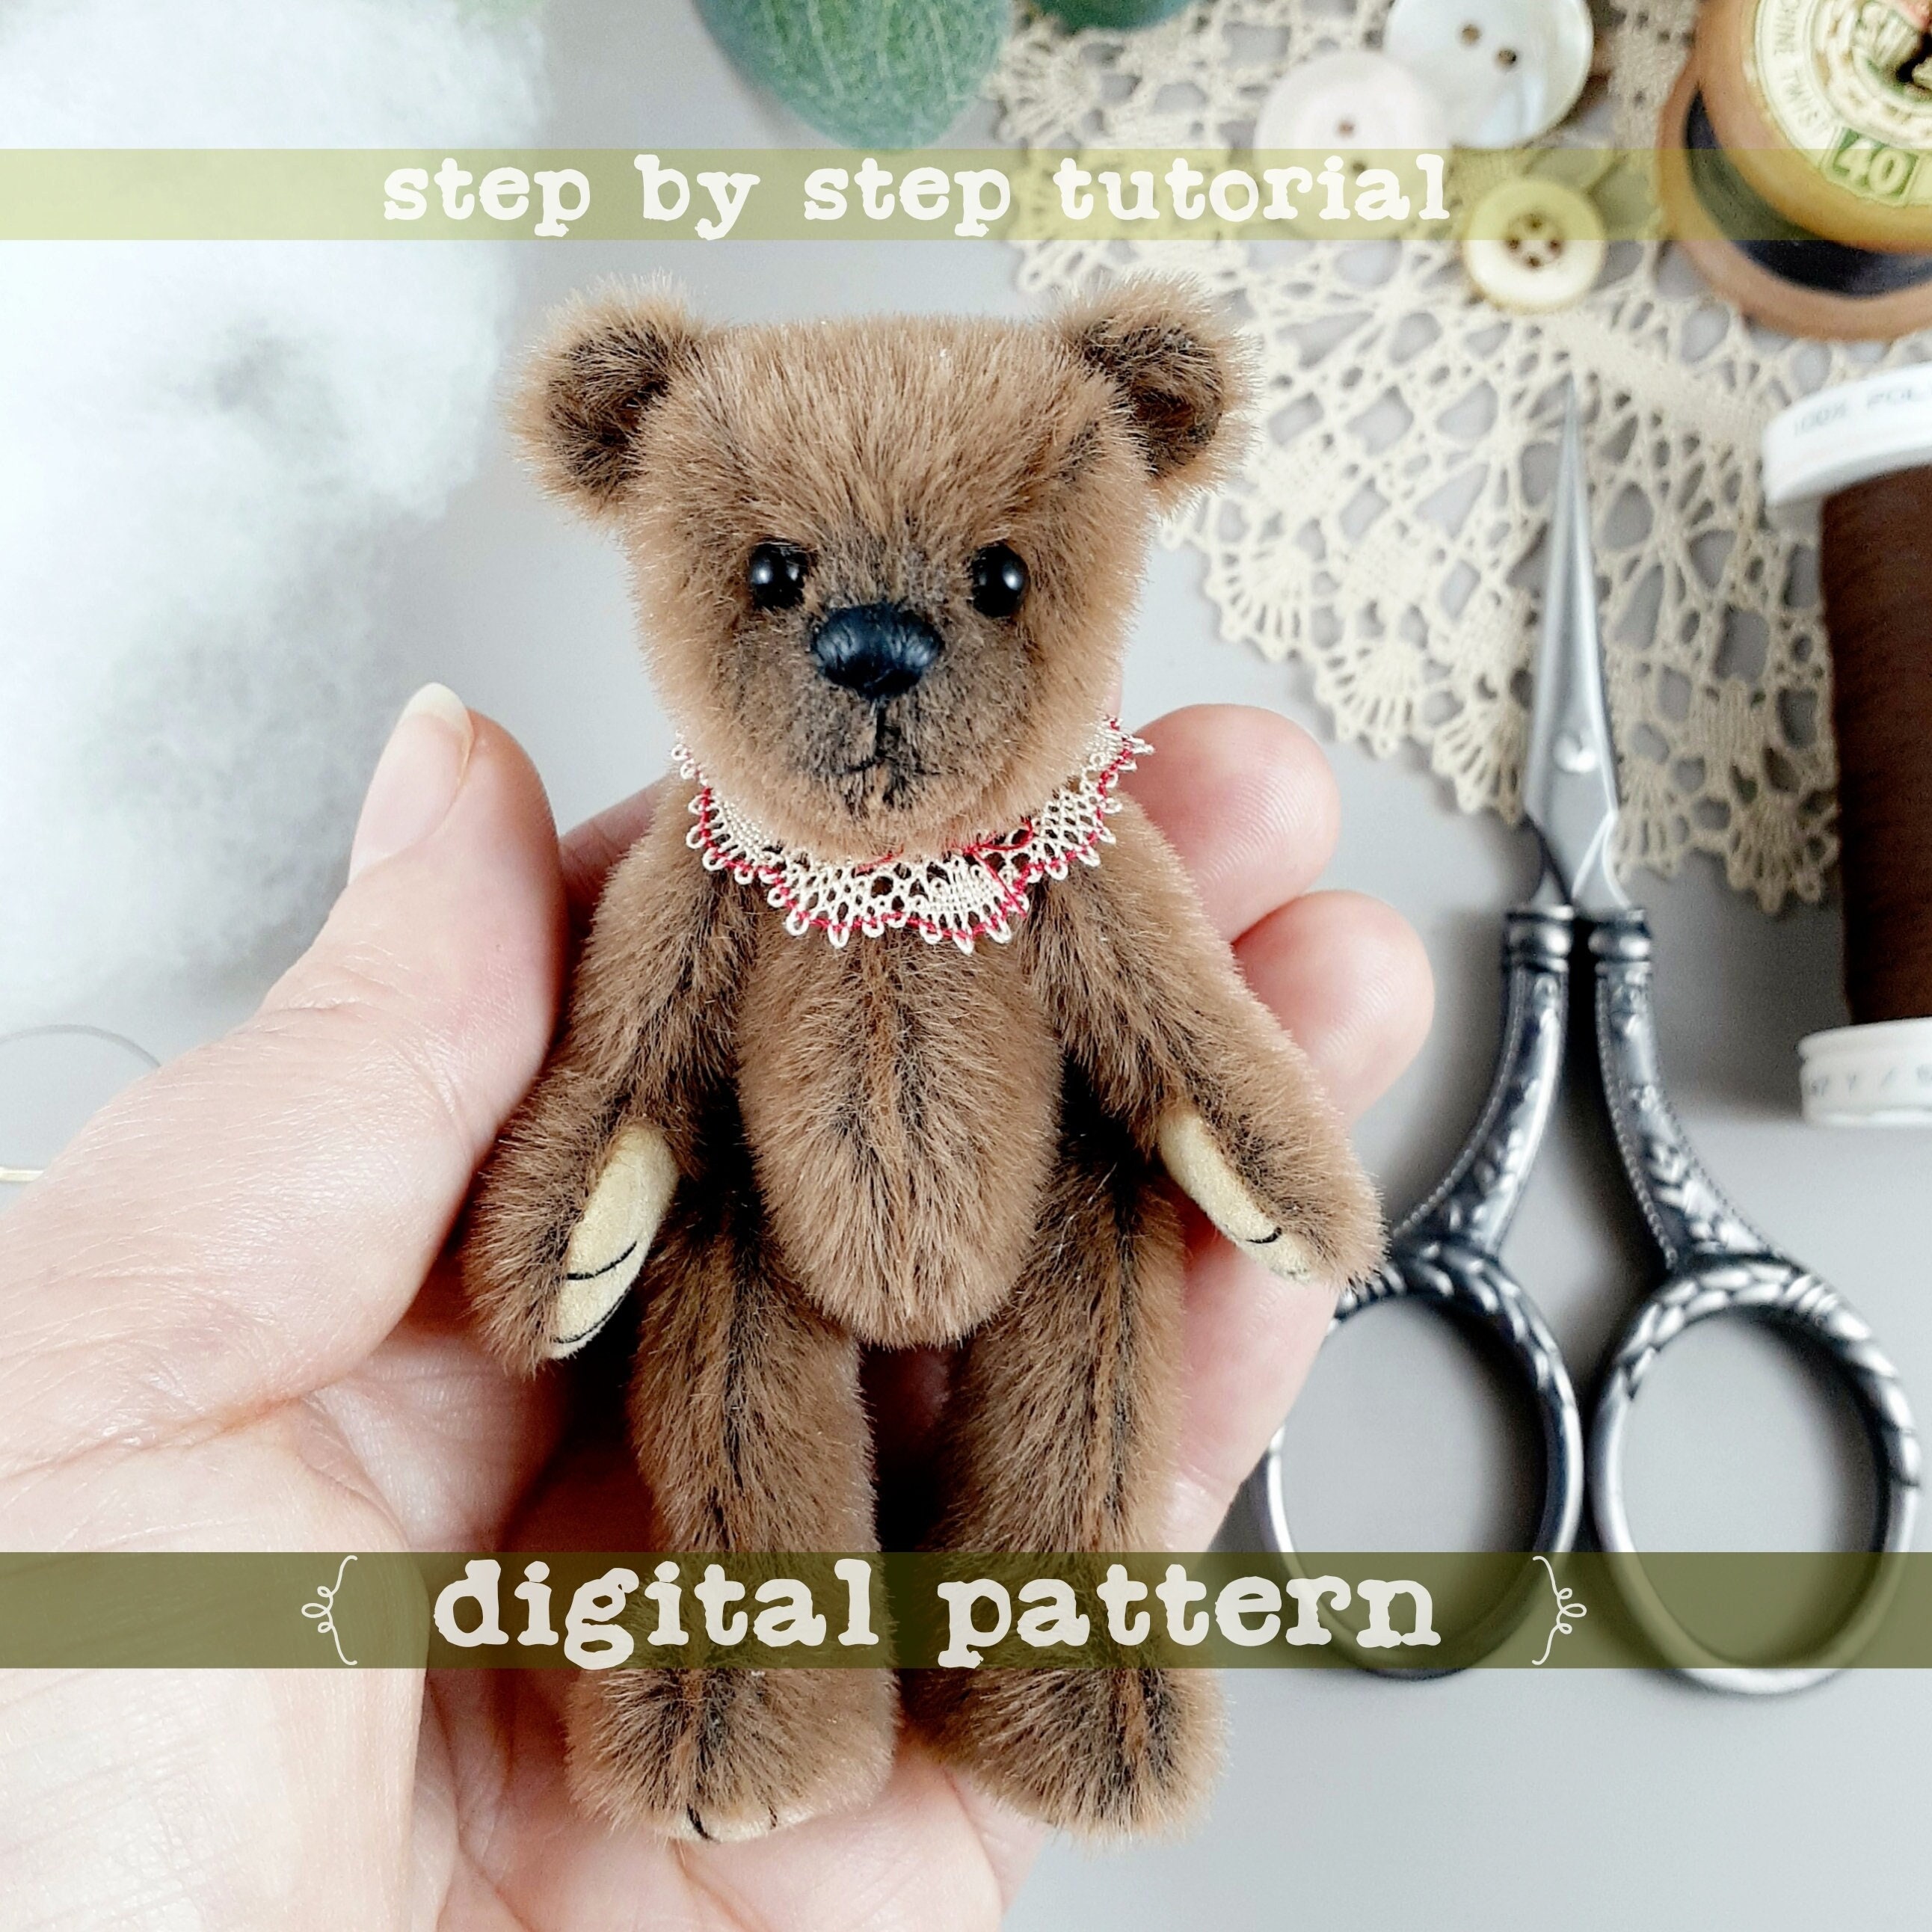 10pcs Memory Bear Pattern Template Set, 10-inch Acrylic Memory Bear  Template Kit With Instructions, New Memory Bear Sewing Kit, Diy Sewing  Embroidery